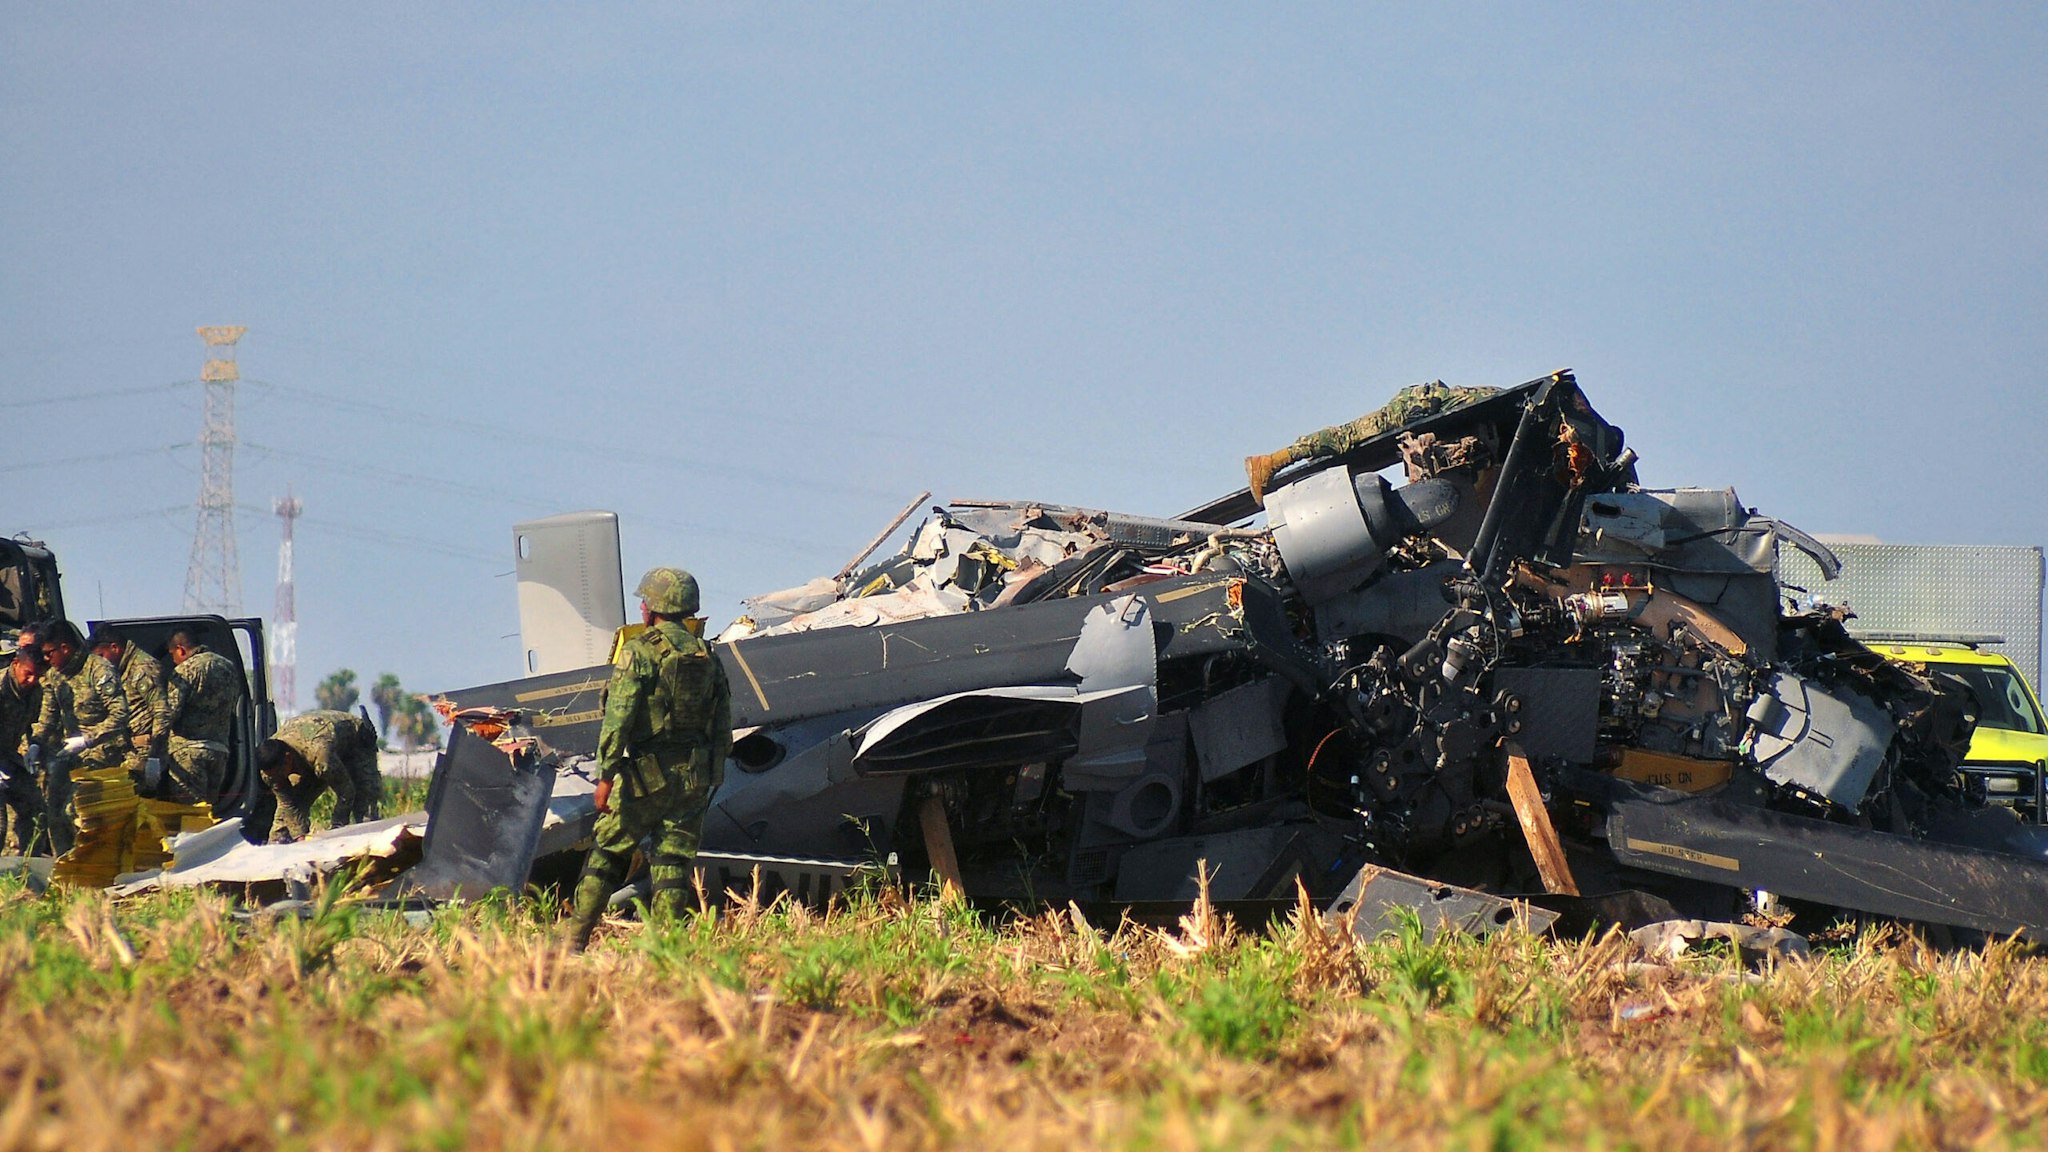 Soldiers of the Mexican Army inspect the wreckage of a Navy helicopter that crashed near the airport of Los Mochis, Sinaloa State, Mexico on July 15, 2022. - Fourteen people were killed when the military helicopter crashed on Friday in northwestern Mexico, the navy said. "A Black Hawk helicopter was involved in an accident, the cause of which is unknown at this time," a statement said. It said the aircraft was carrying 15 people and the sole survivor was receiving medical treatment after the crash in the state of Sinaloa.